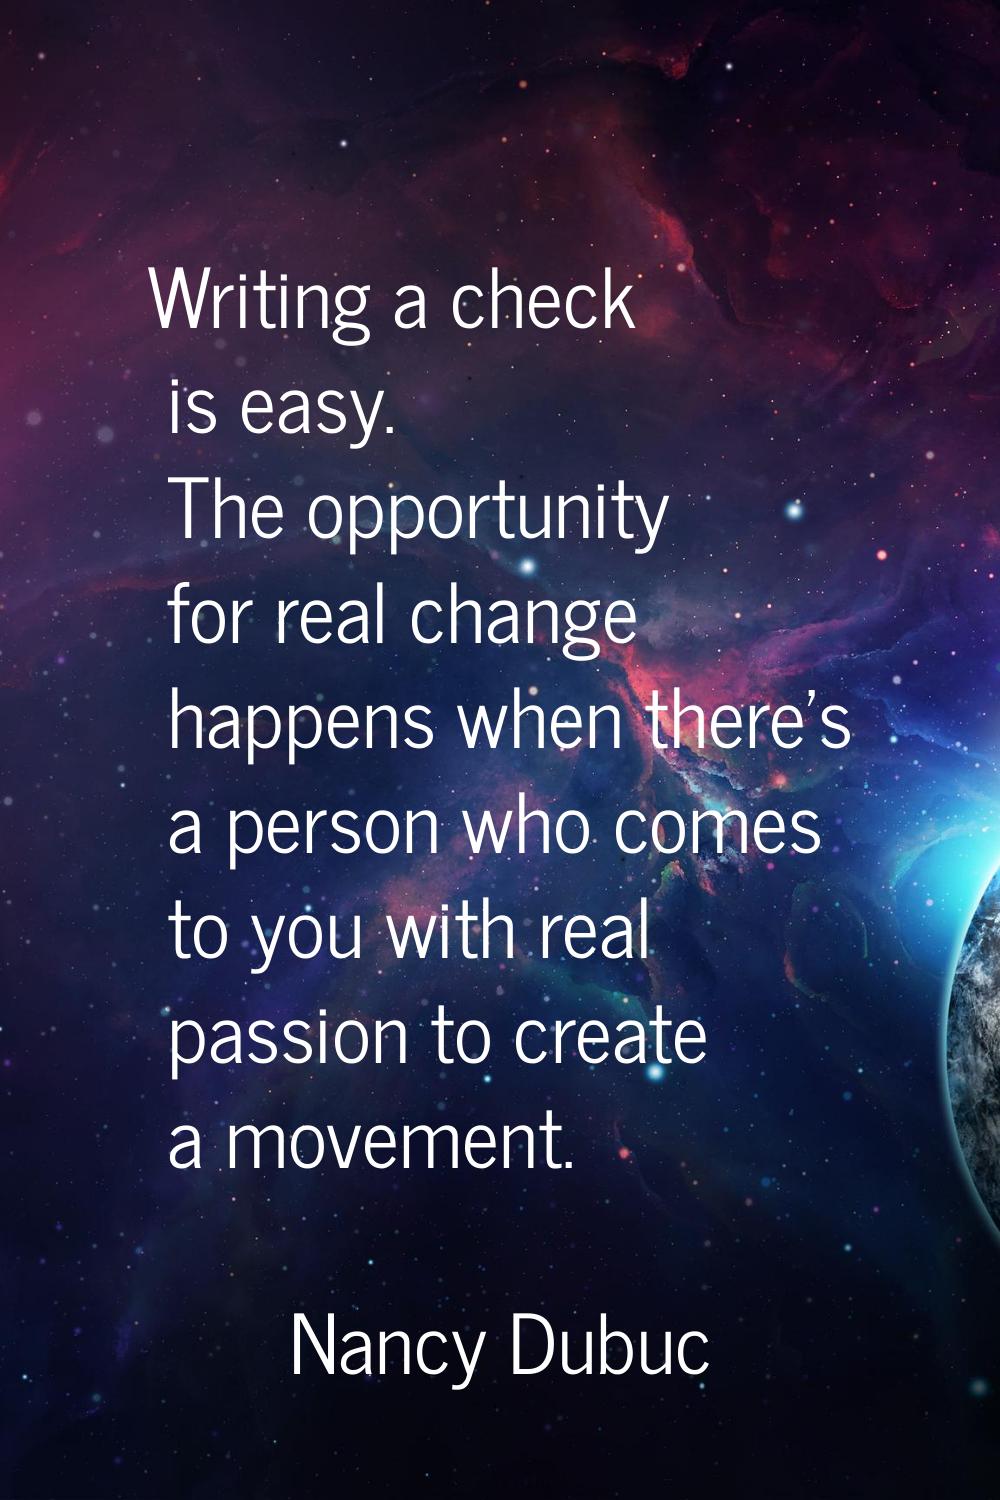 Writing a check is easy. The opportunity for real change happens when there's a person who comes to